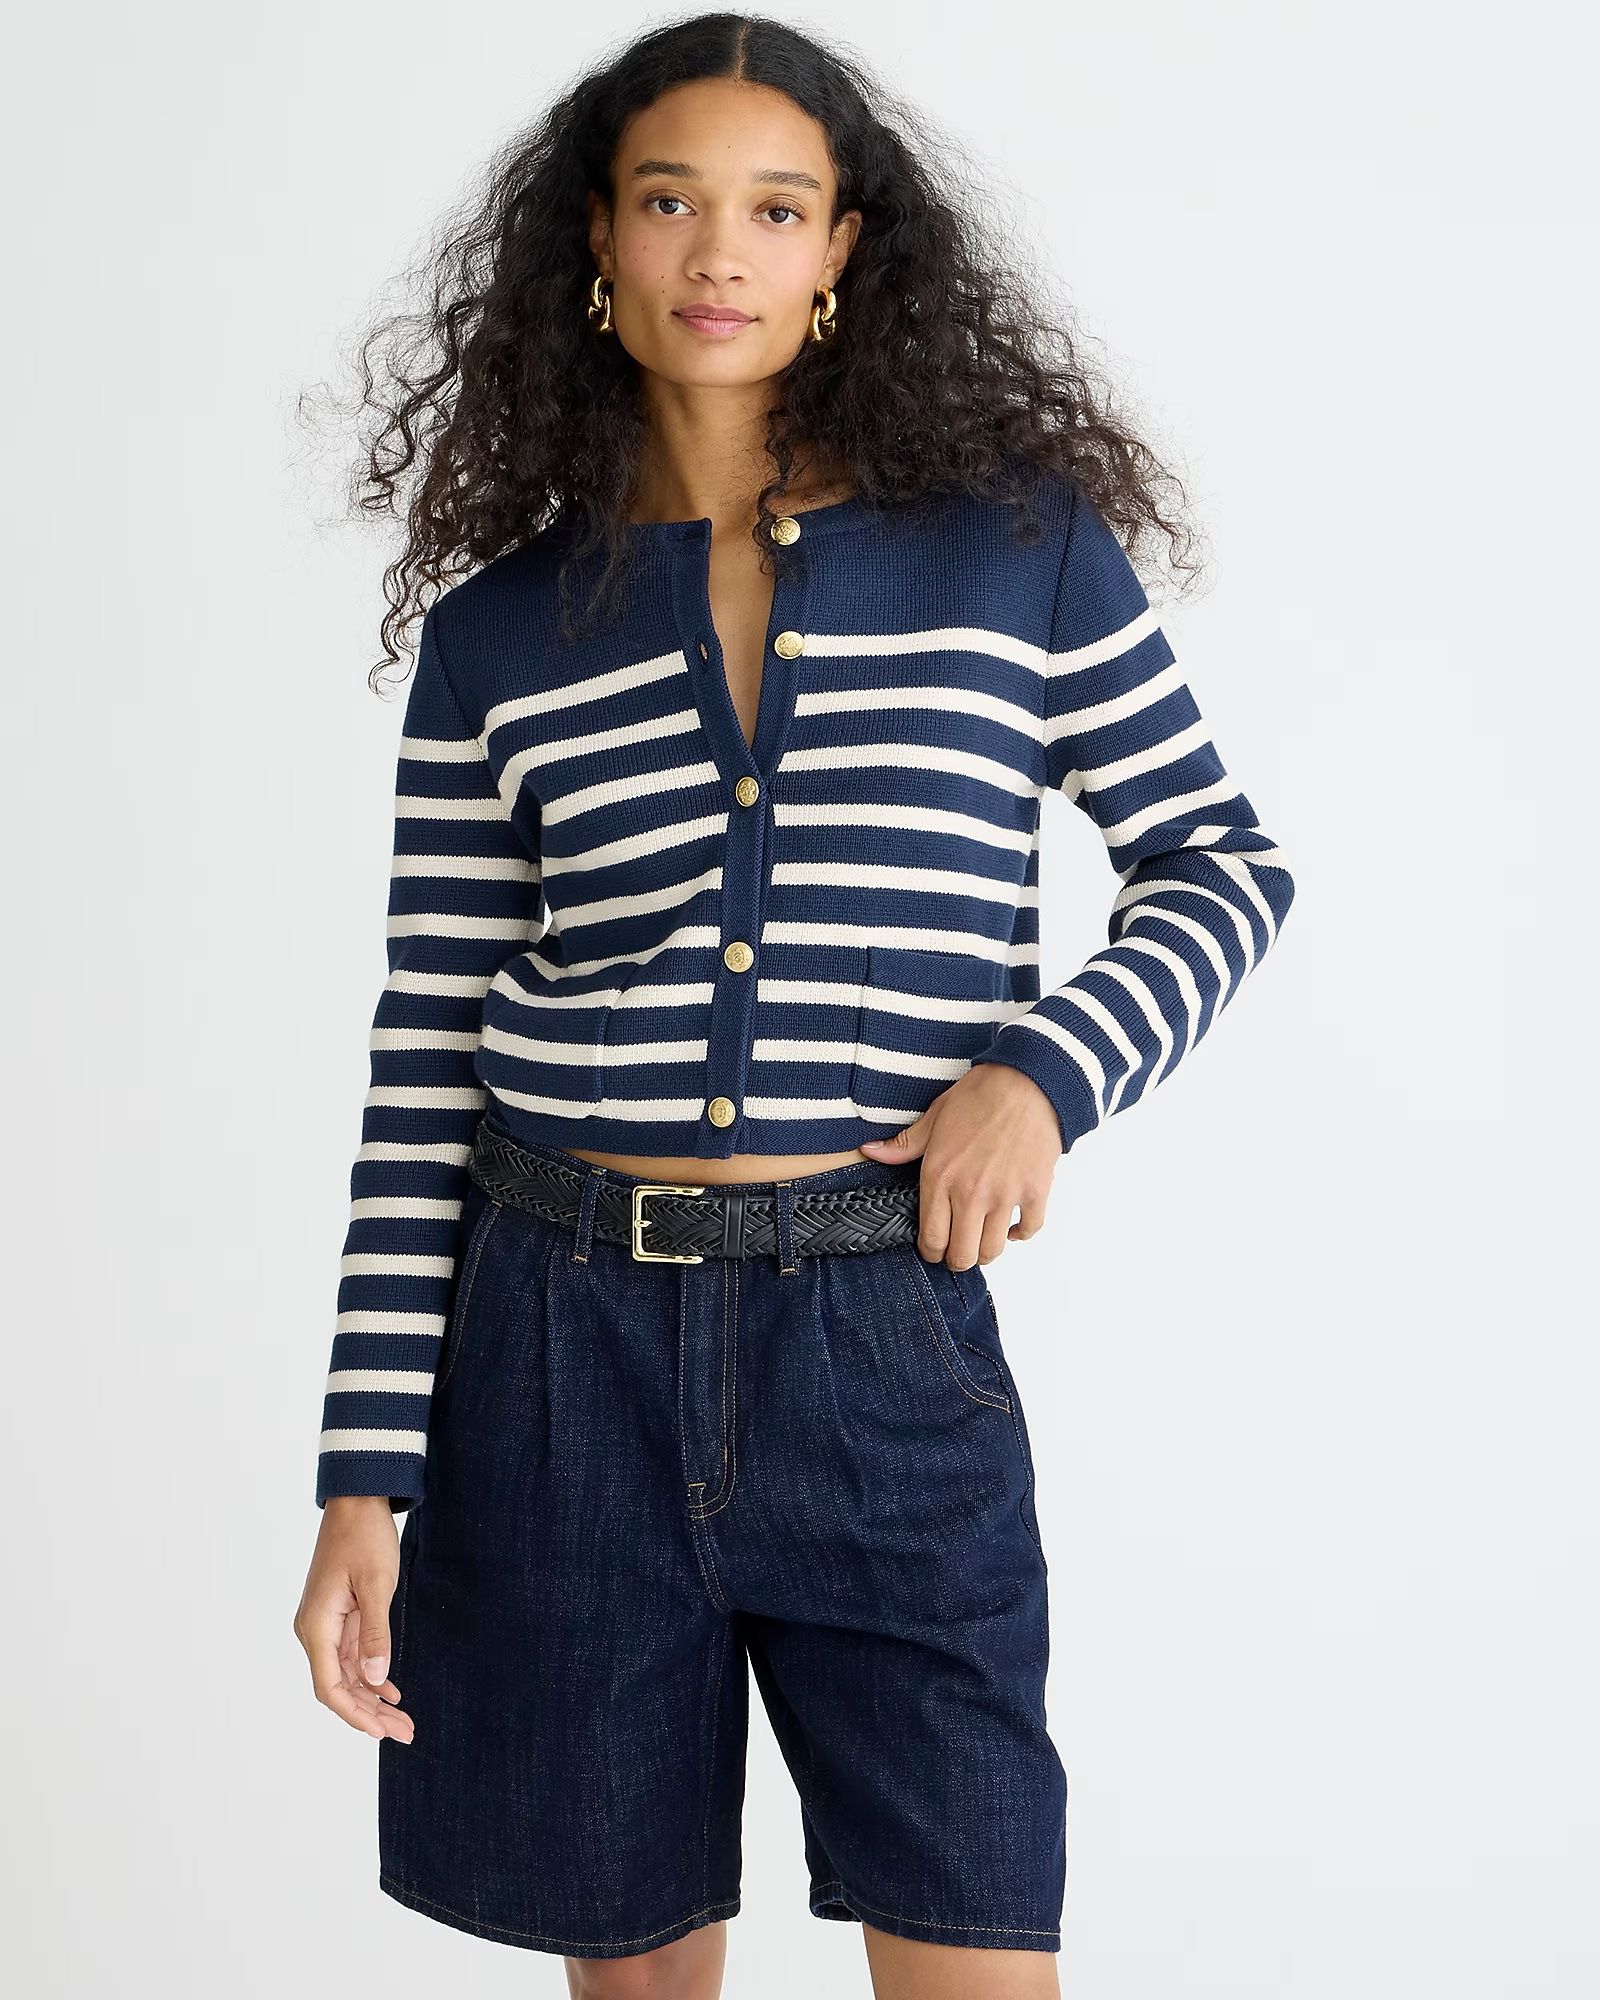 top rated4.7(673 REVIEWS)Emilie sweater lady jacket in stripe$138.00Limited time. Price as marked... | J.Crew US